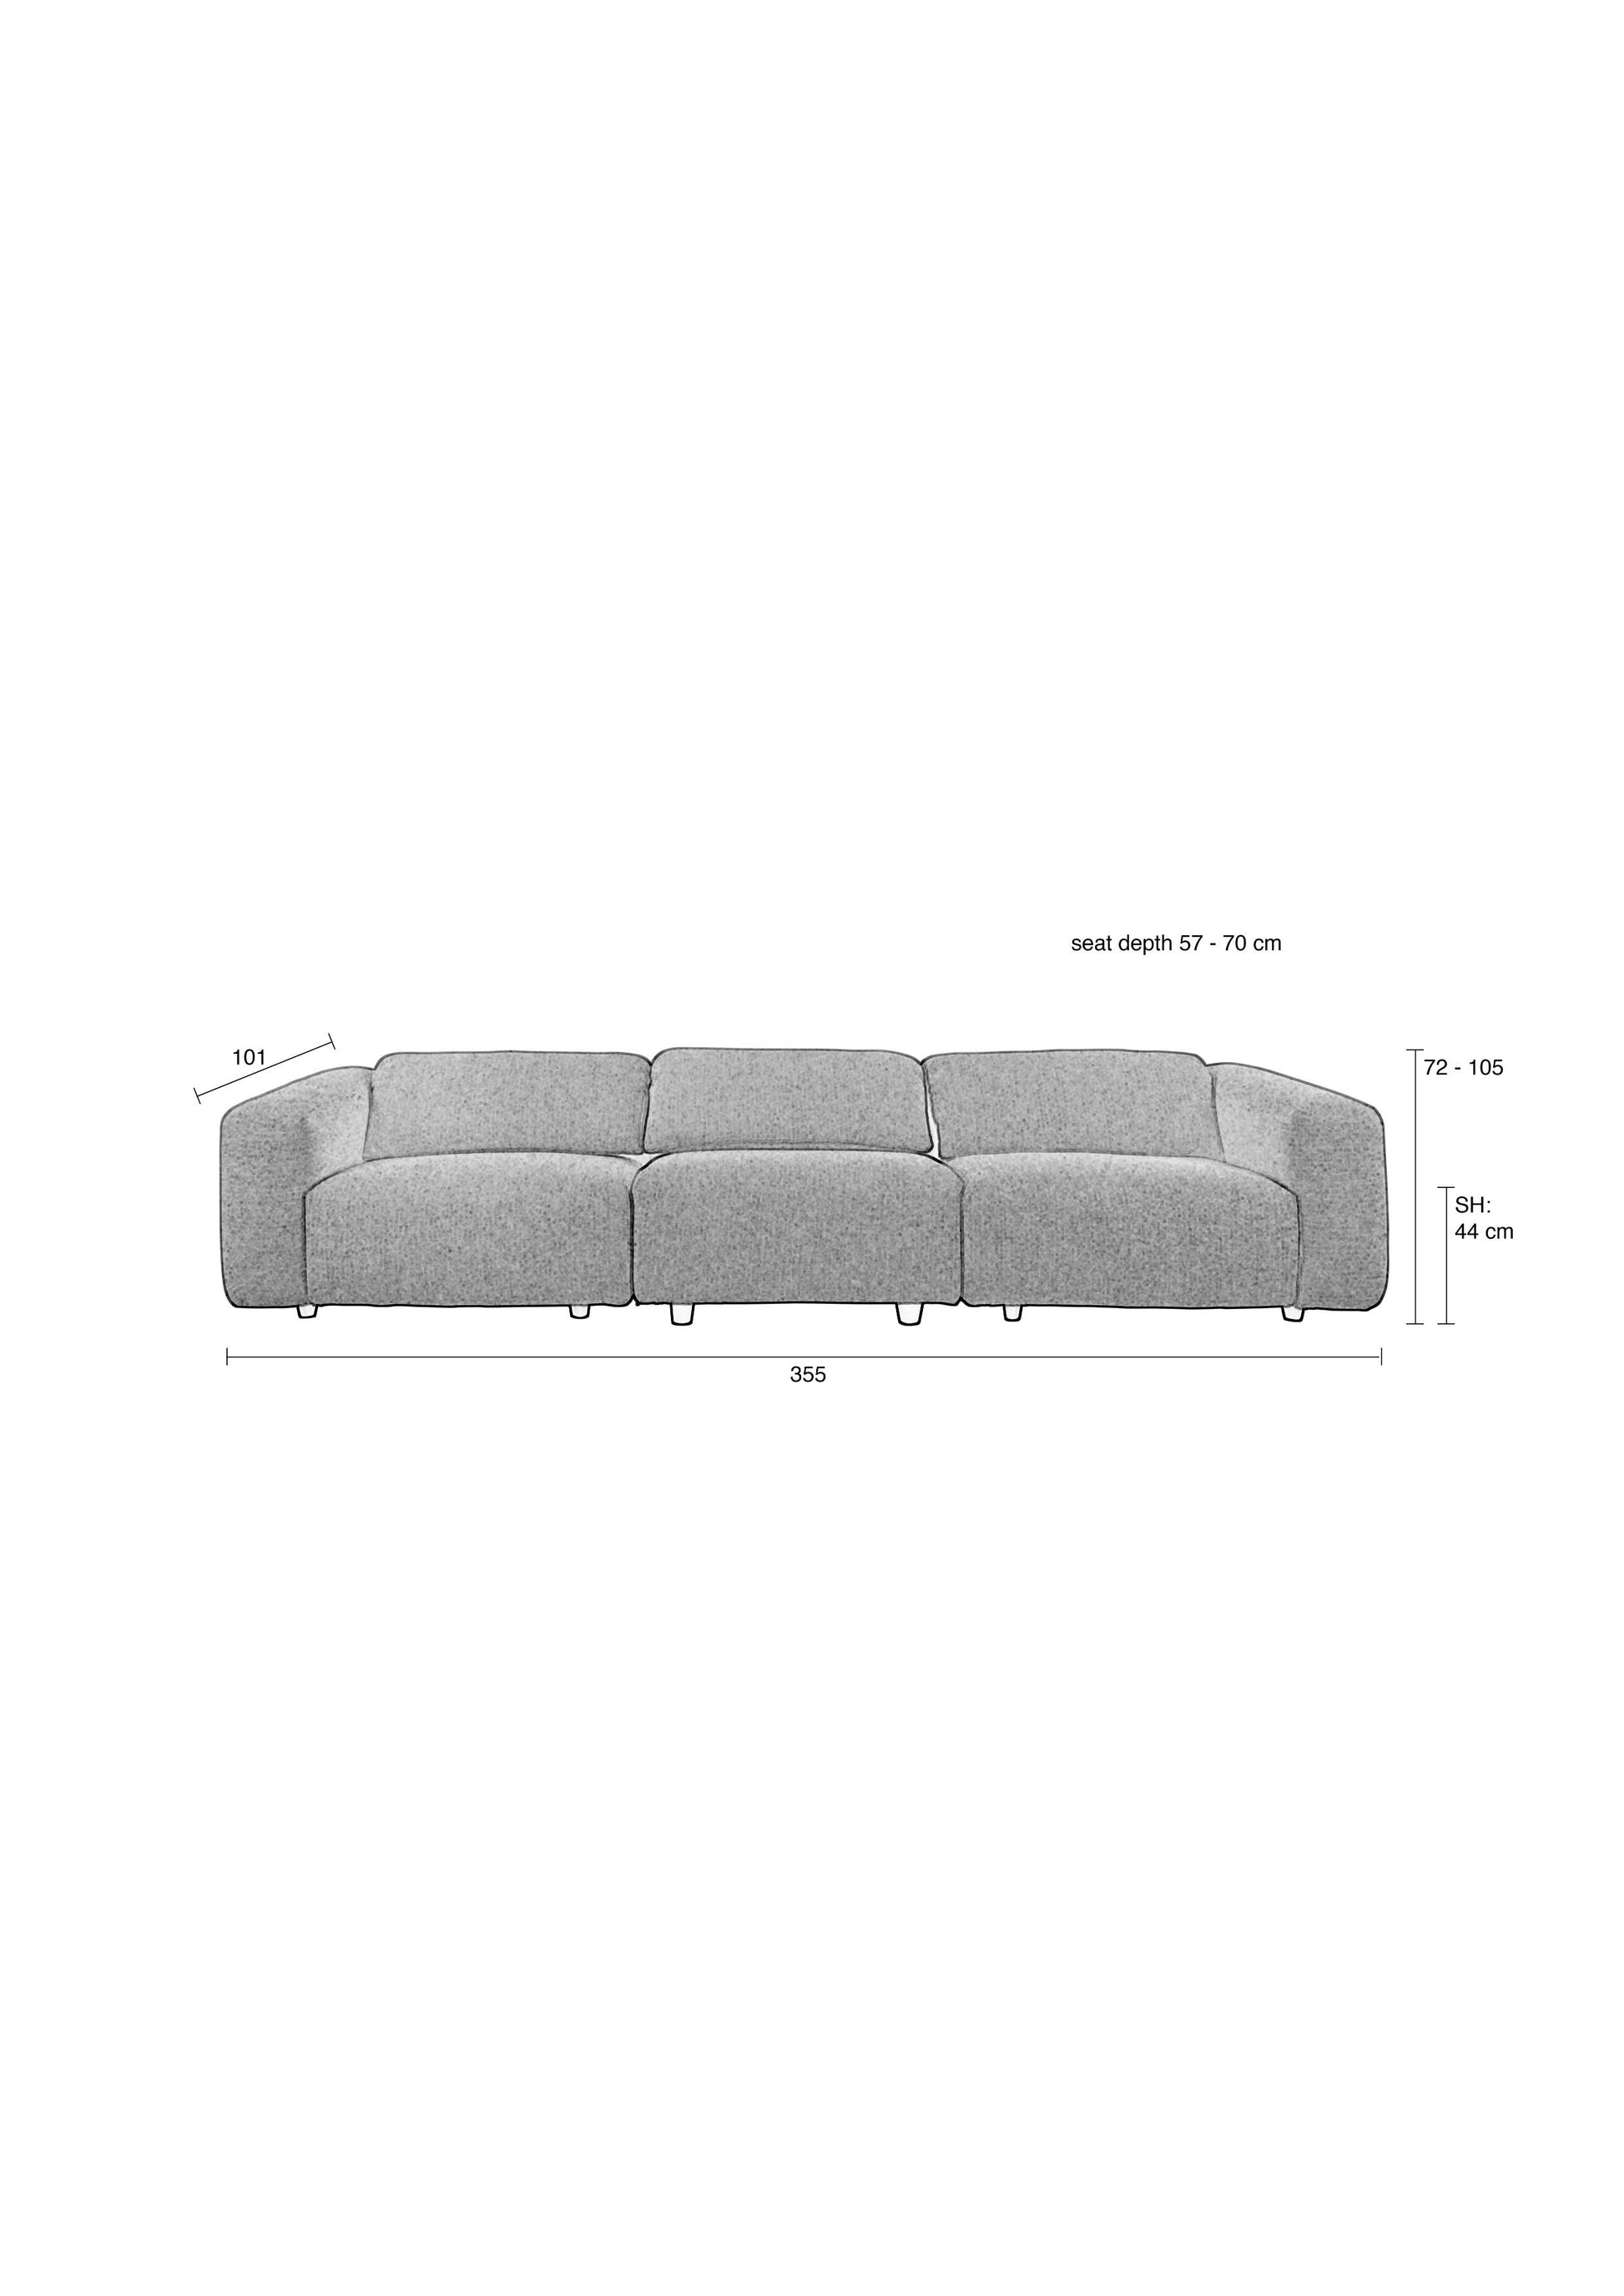 Zuiver | SOFA WINGS 4,5-SEATER CARAMEL Default Title